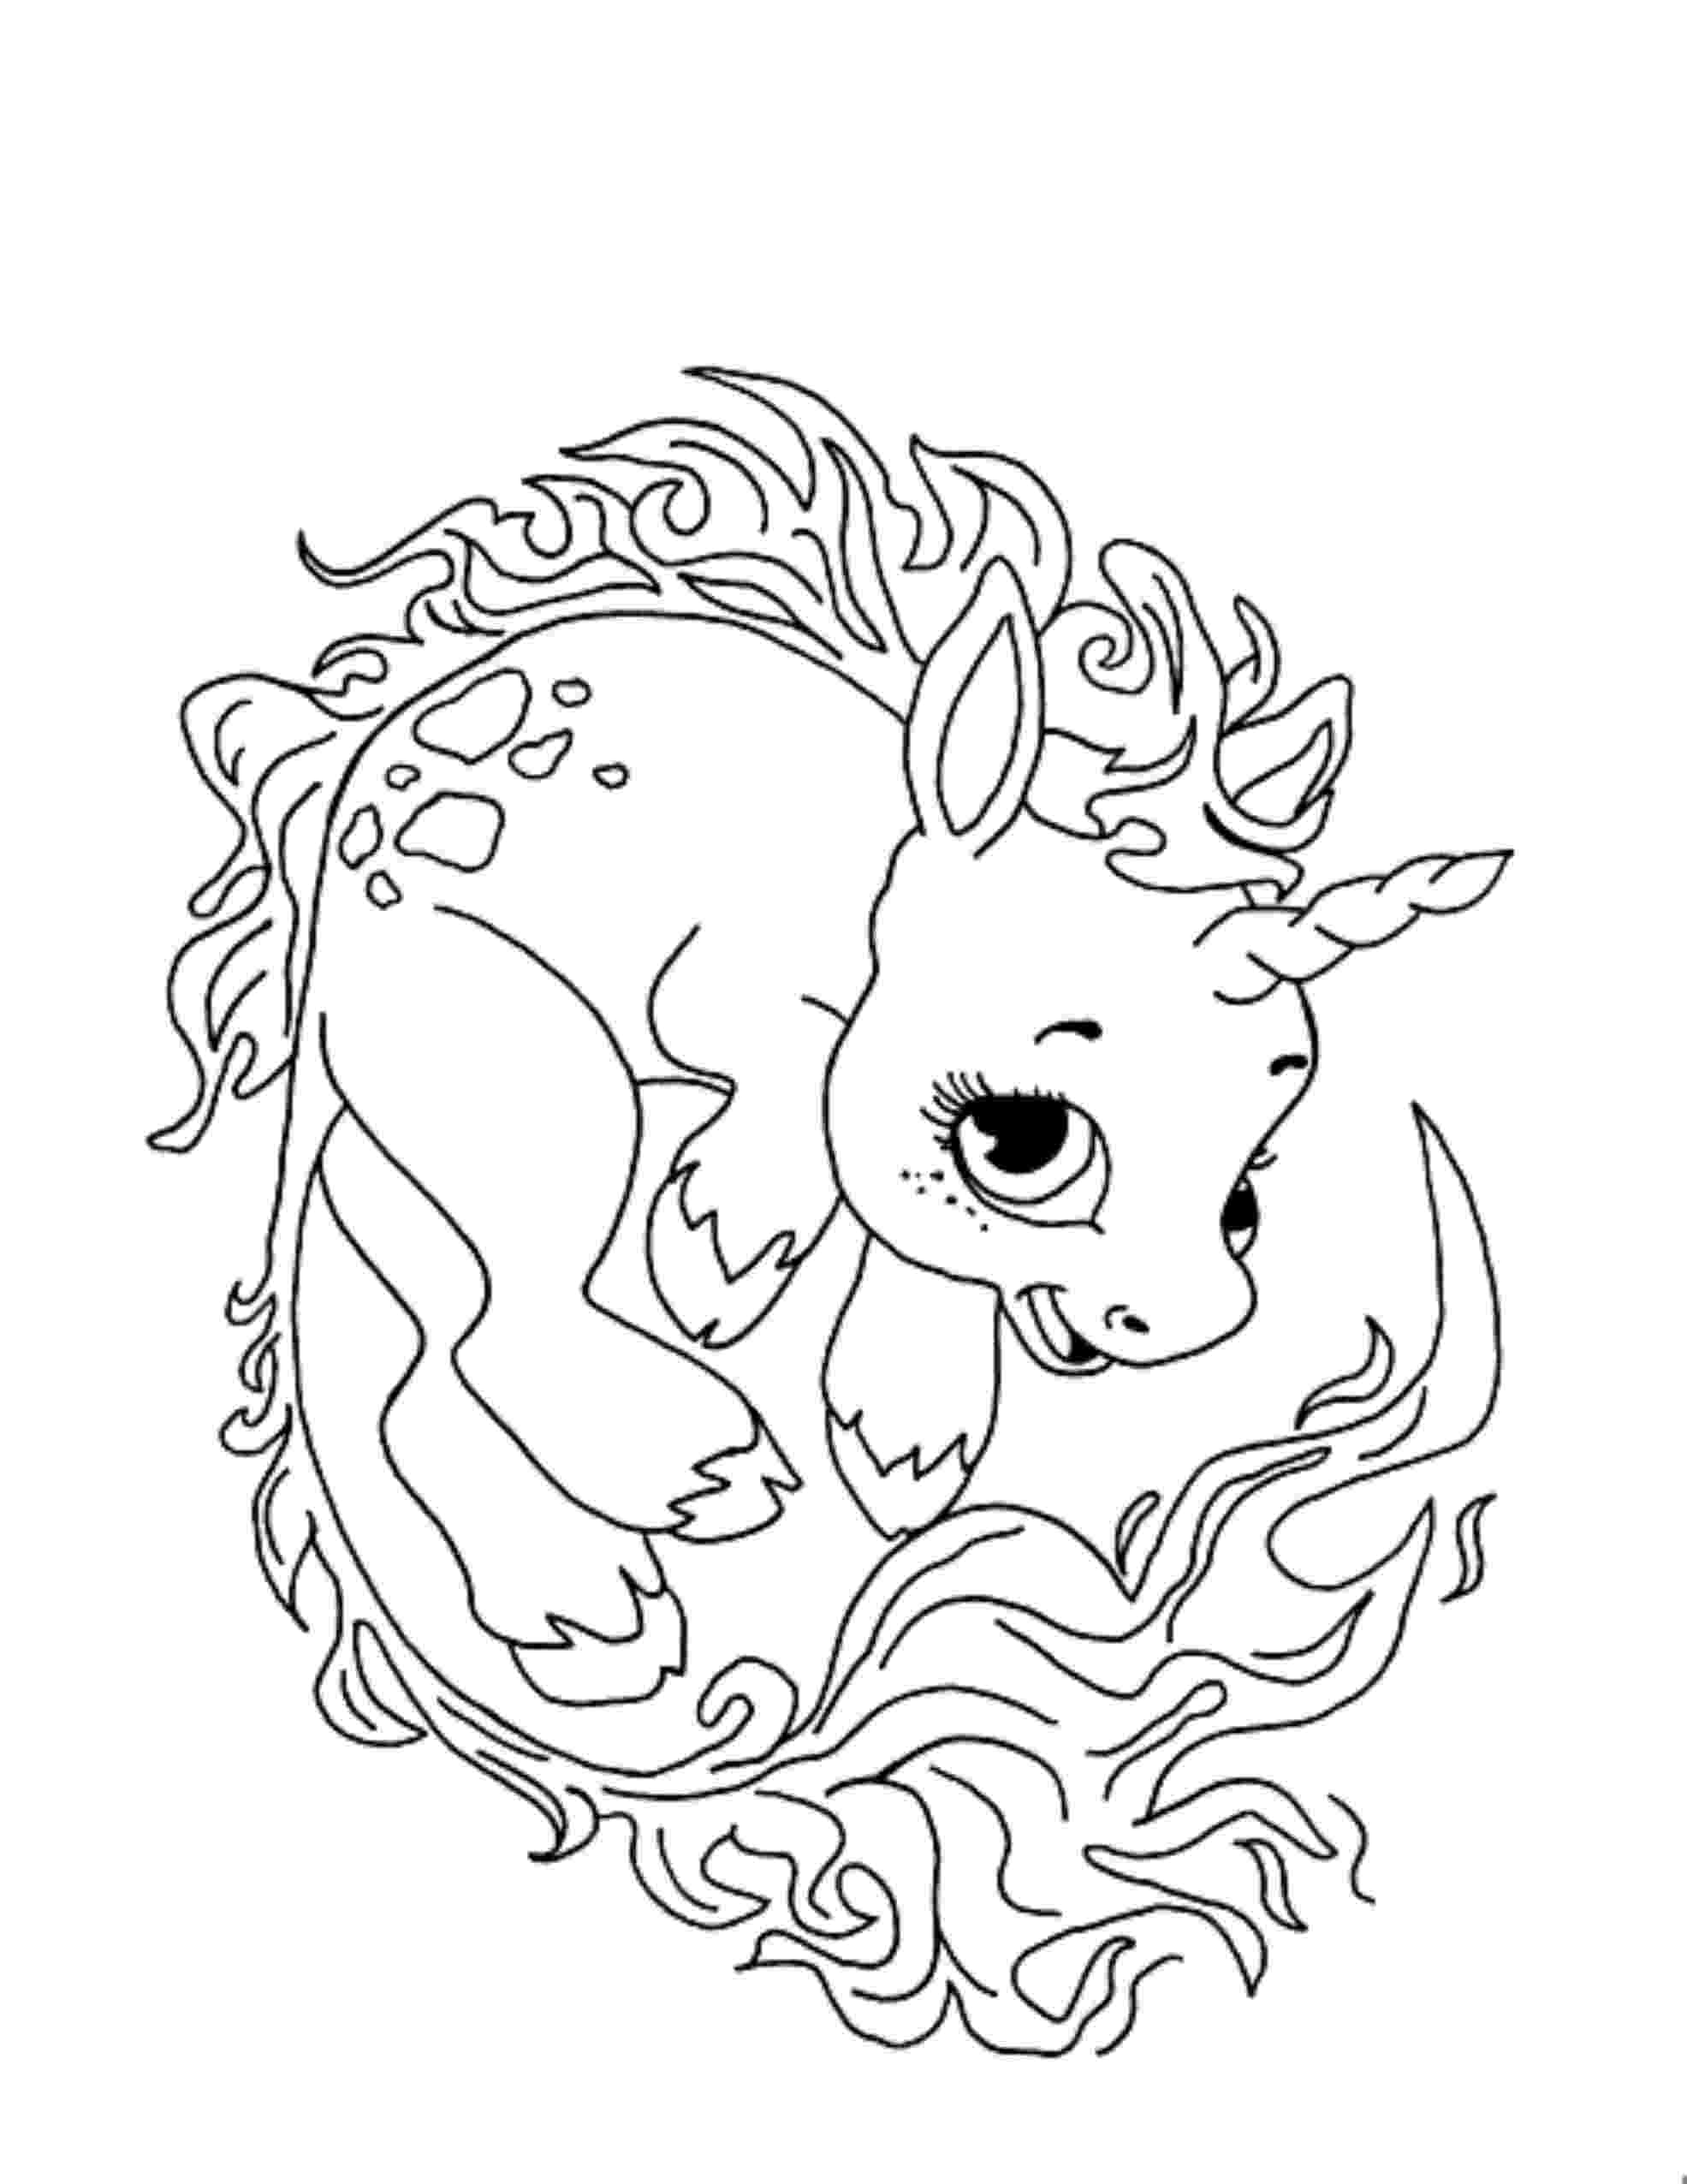 unicorn coloring pages printable print download unicorn coloring pages for children pages unicorn printable coloring 